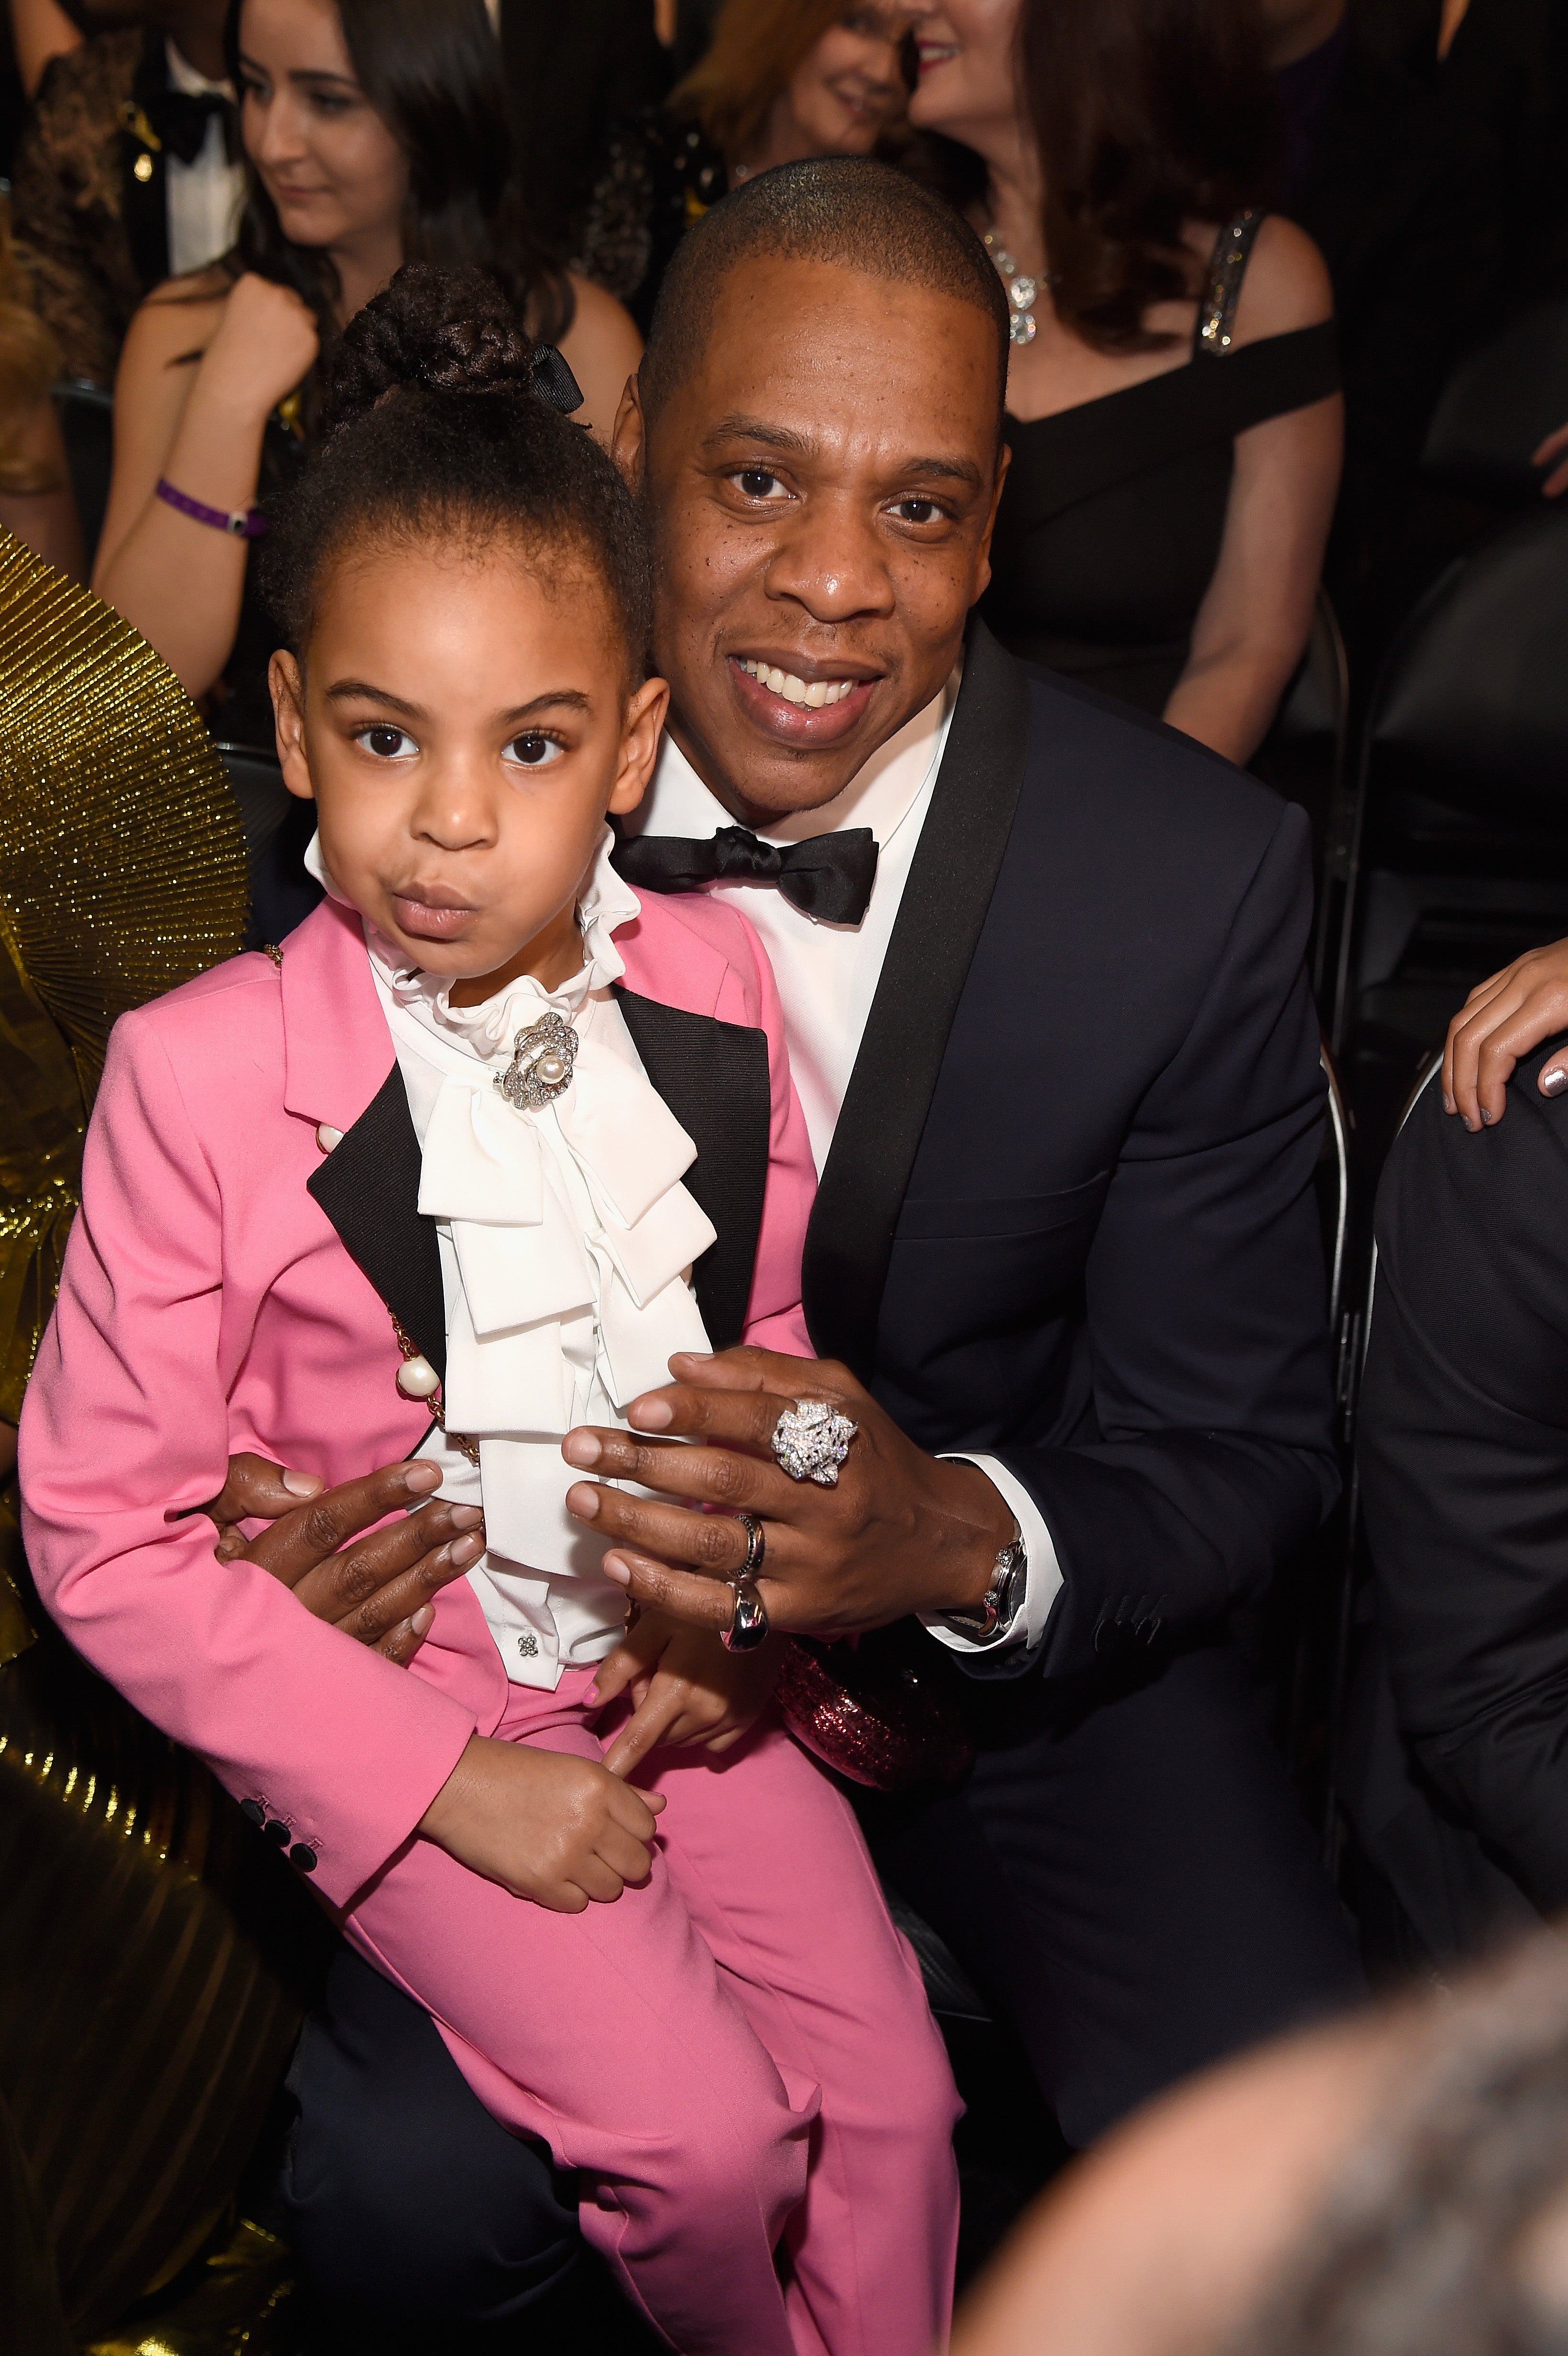 Thewrapupmagazine: Is BlueIvy Jay-Z's Daughter?